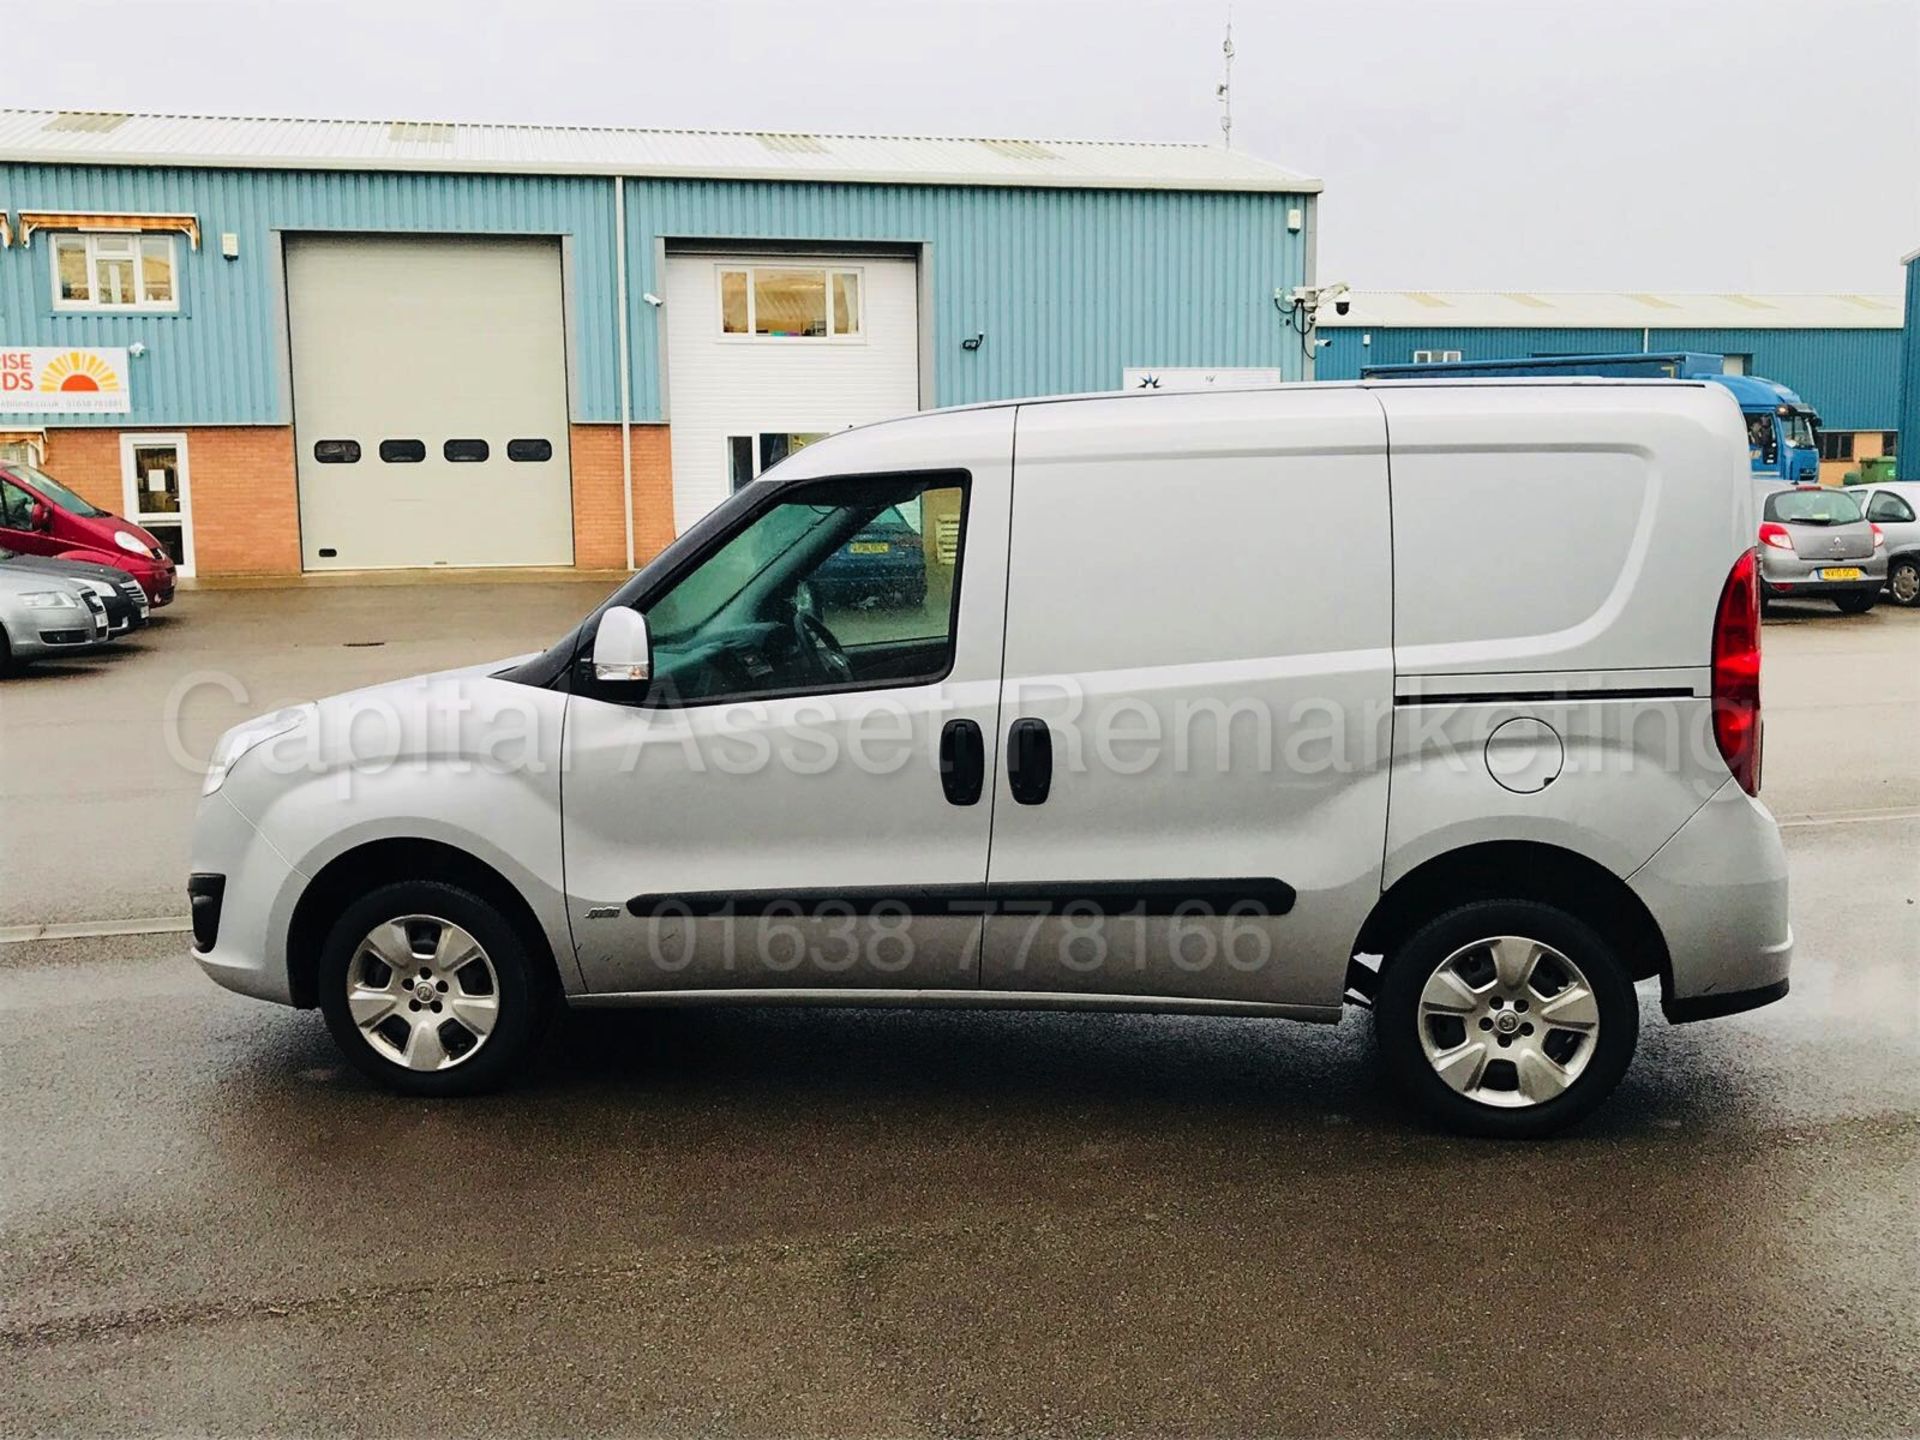 VAUXHALL COMBO 2000 L1H1 'SPORTIVE' (2015 MODEL) 'CDTI - 90 BHP' **AIR CON** (1 OWNER FROM NEW) - Image 4 of 19